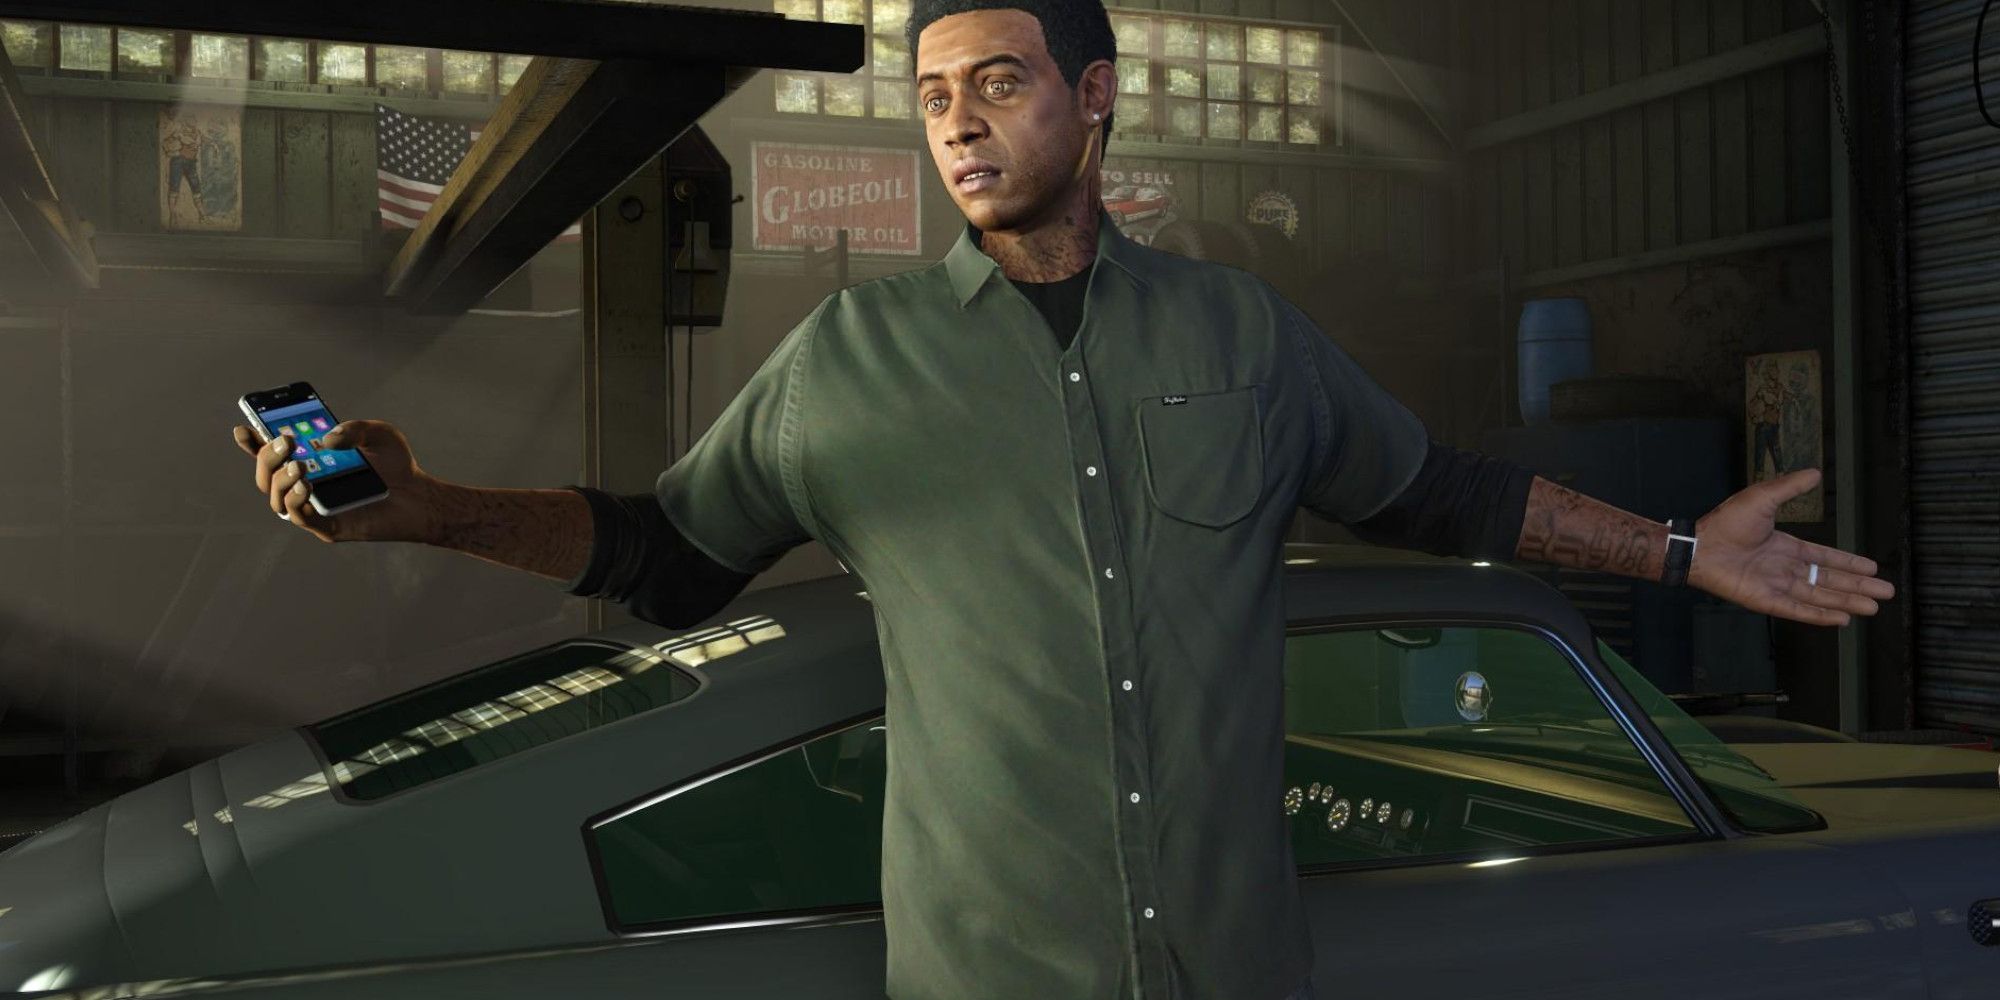 Lamar poses in front of a car